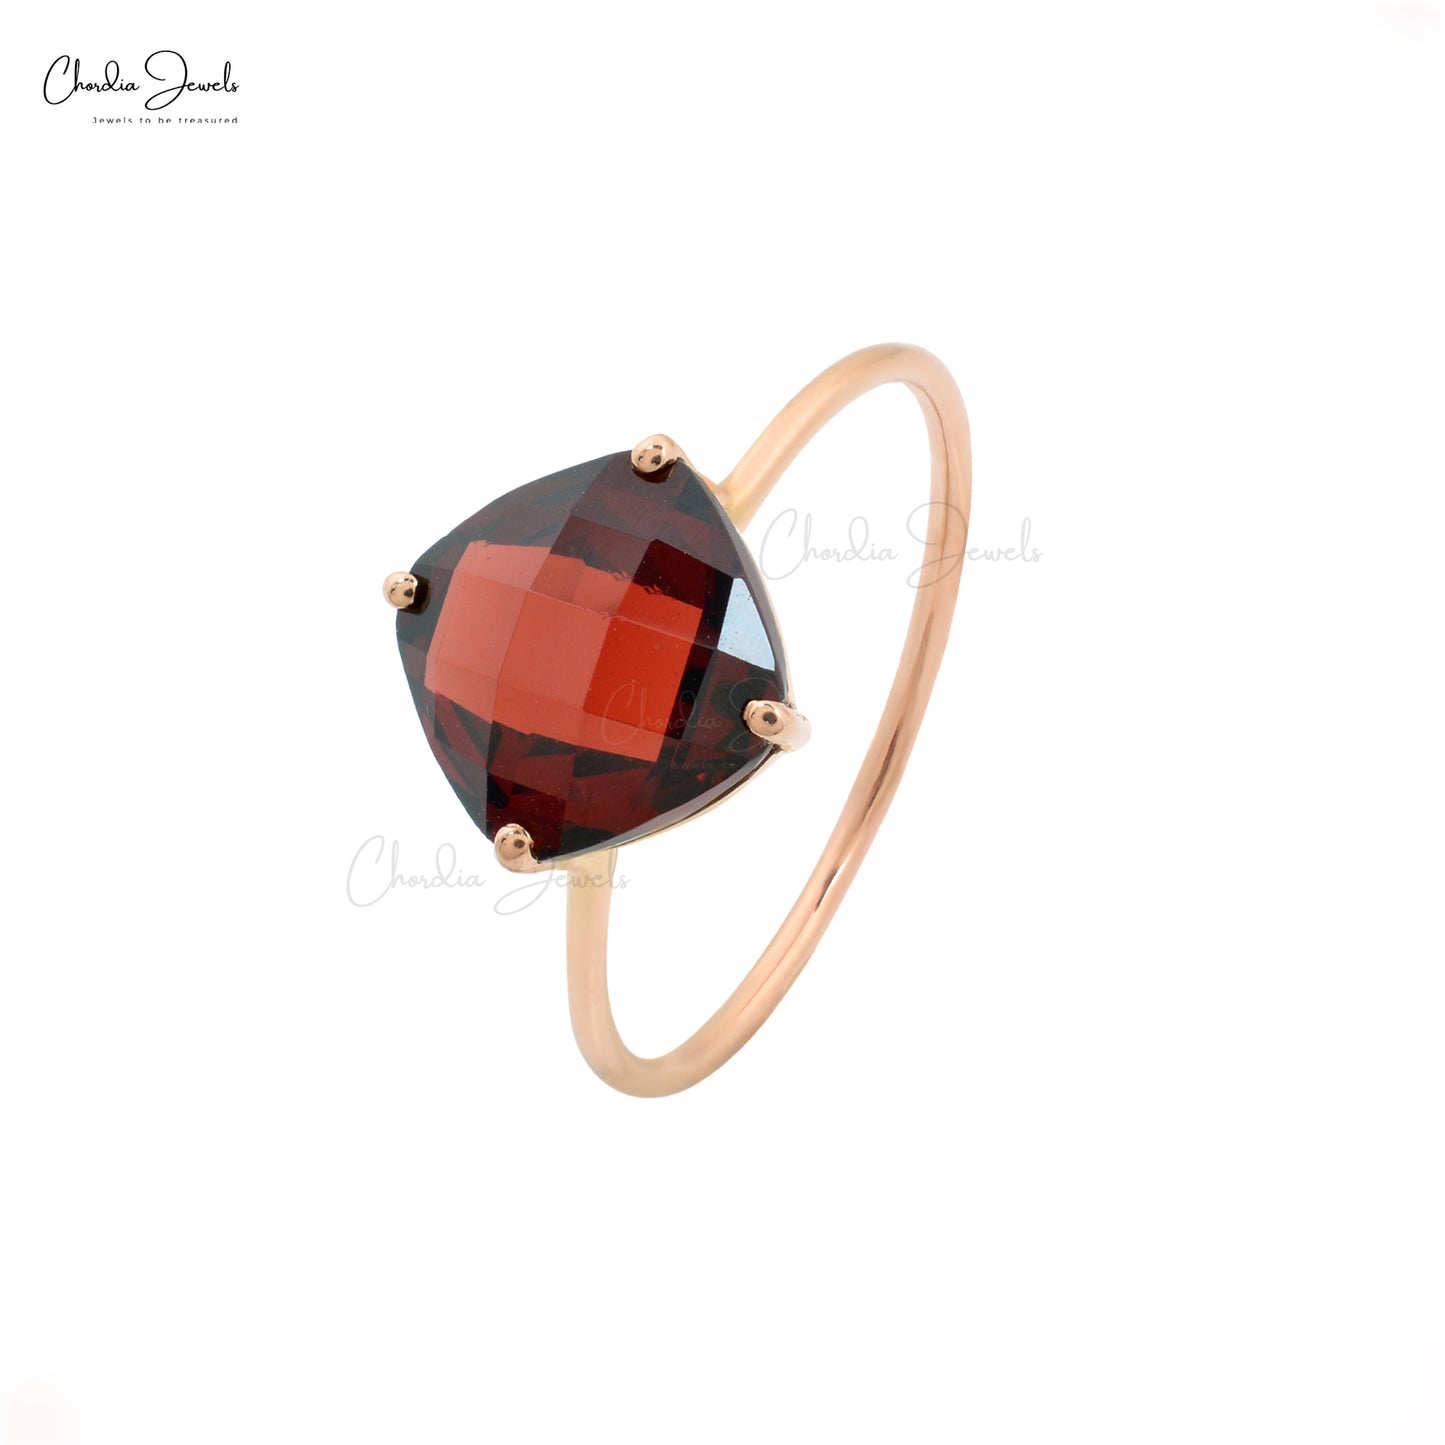 AAA Quality 8mm Cushion Cut Gemstone Ring in14k Rose Gold